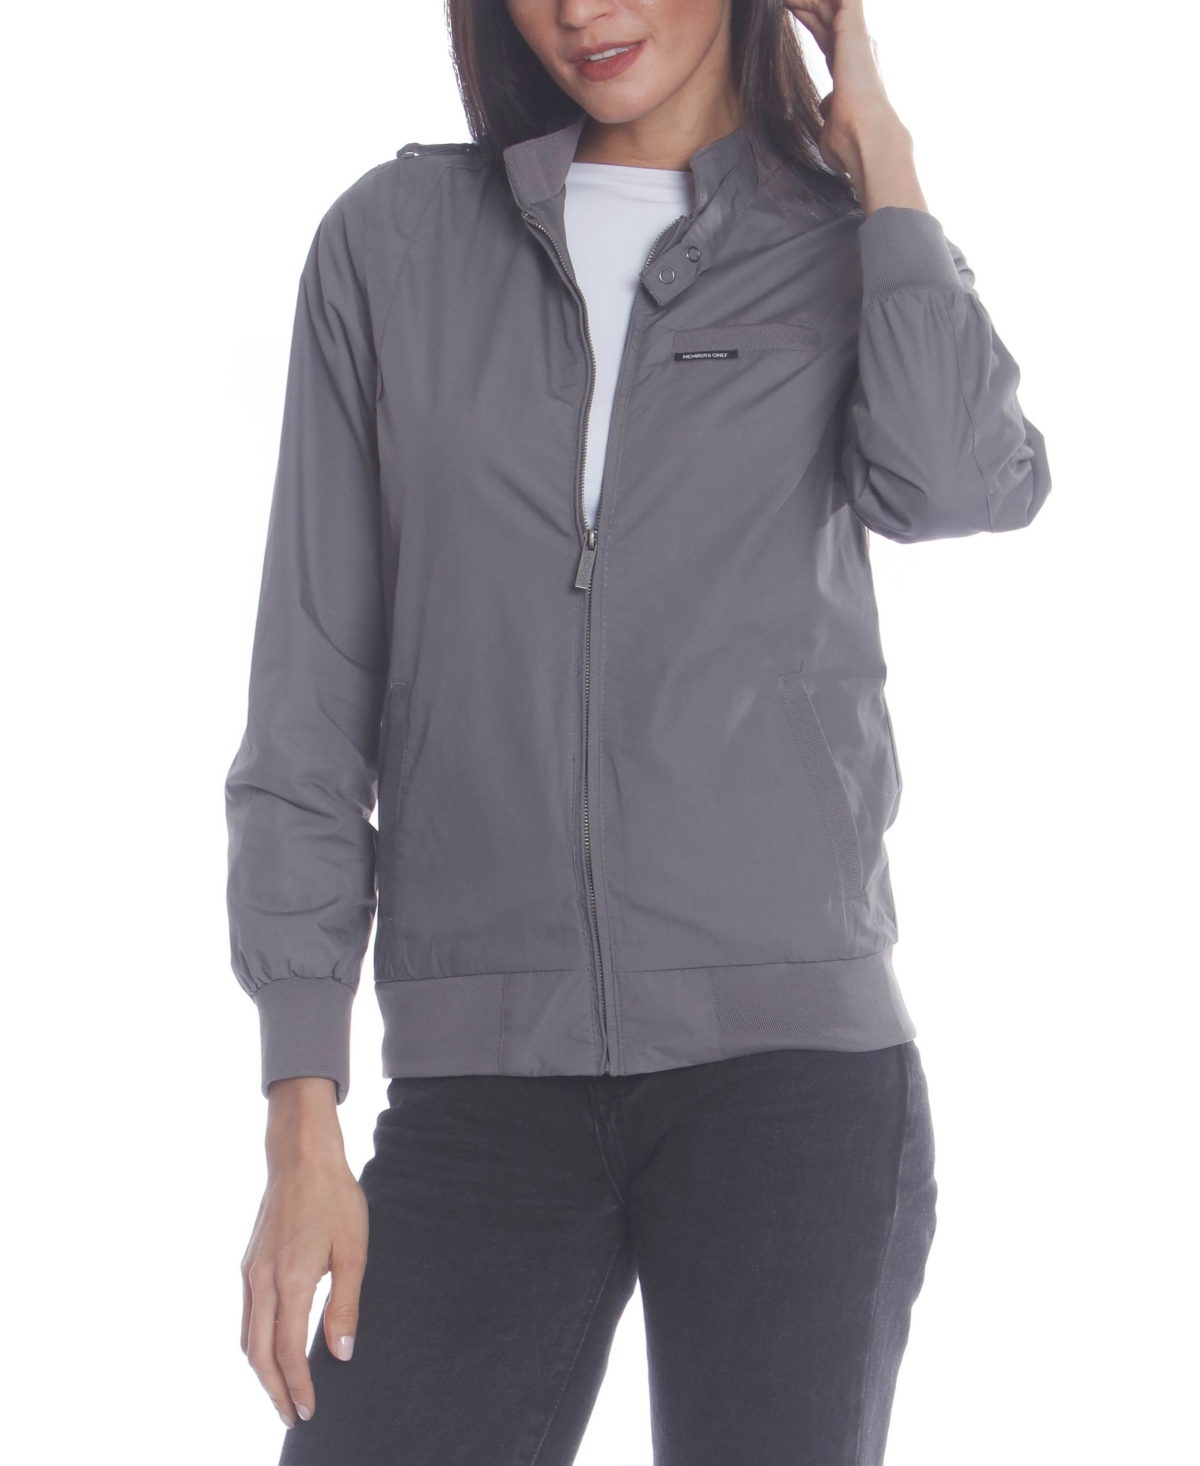 Members Only Women's Classic Iconic Racer Jacket - Large, Light Grey